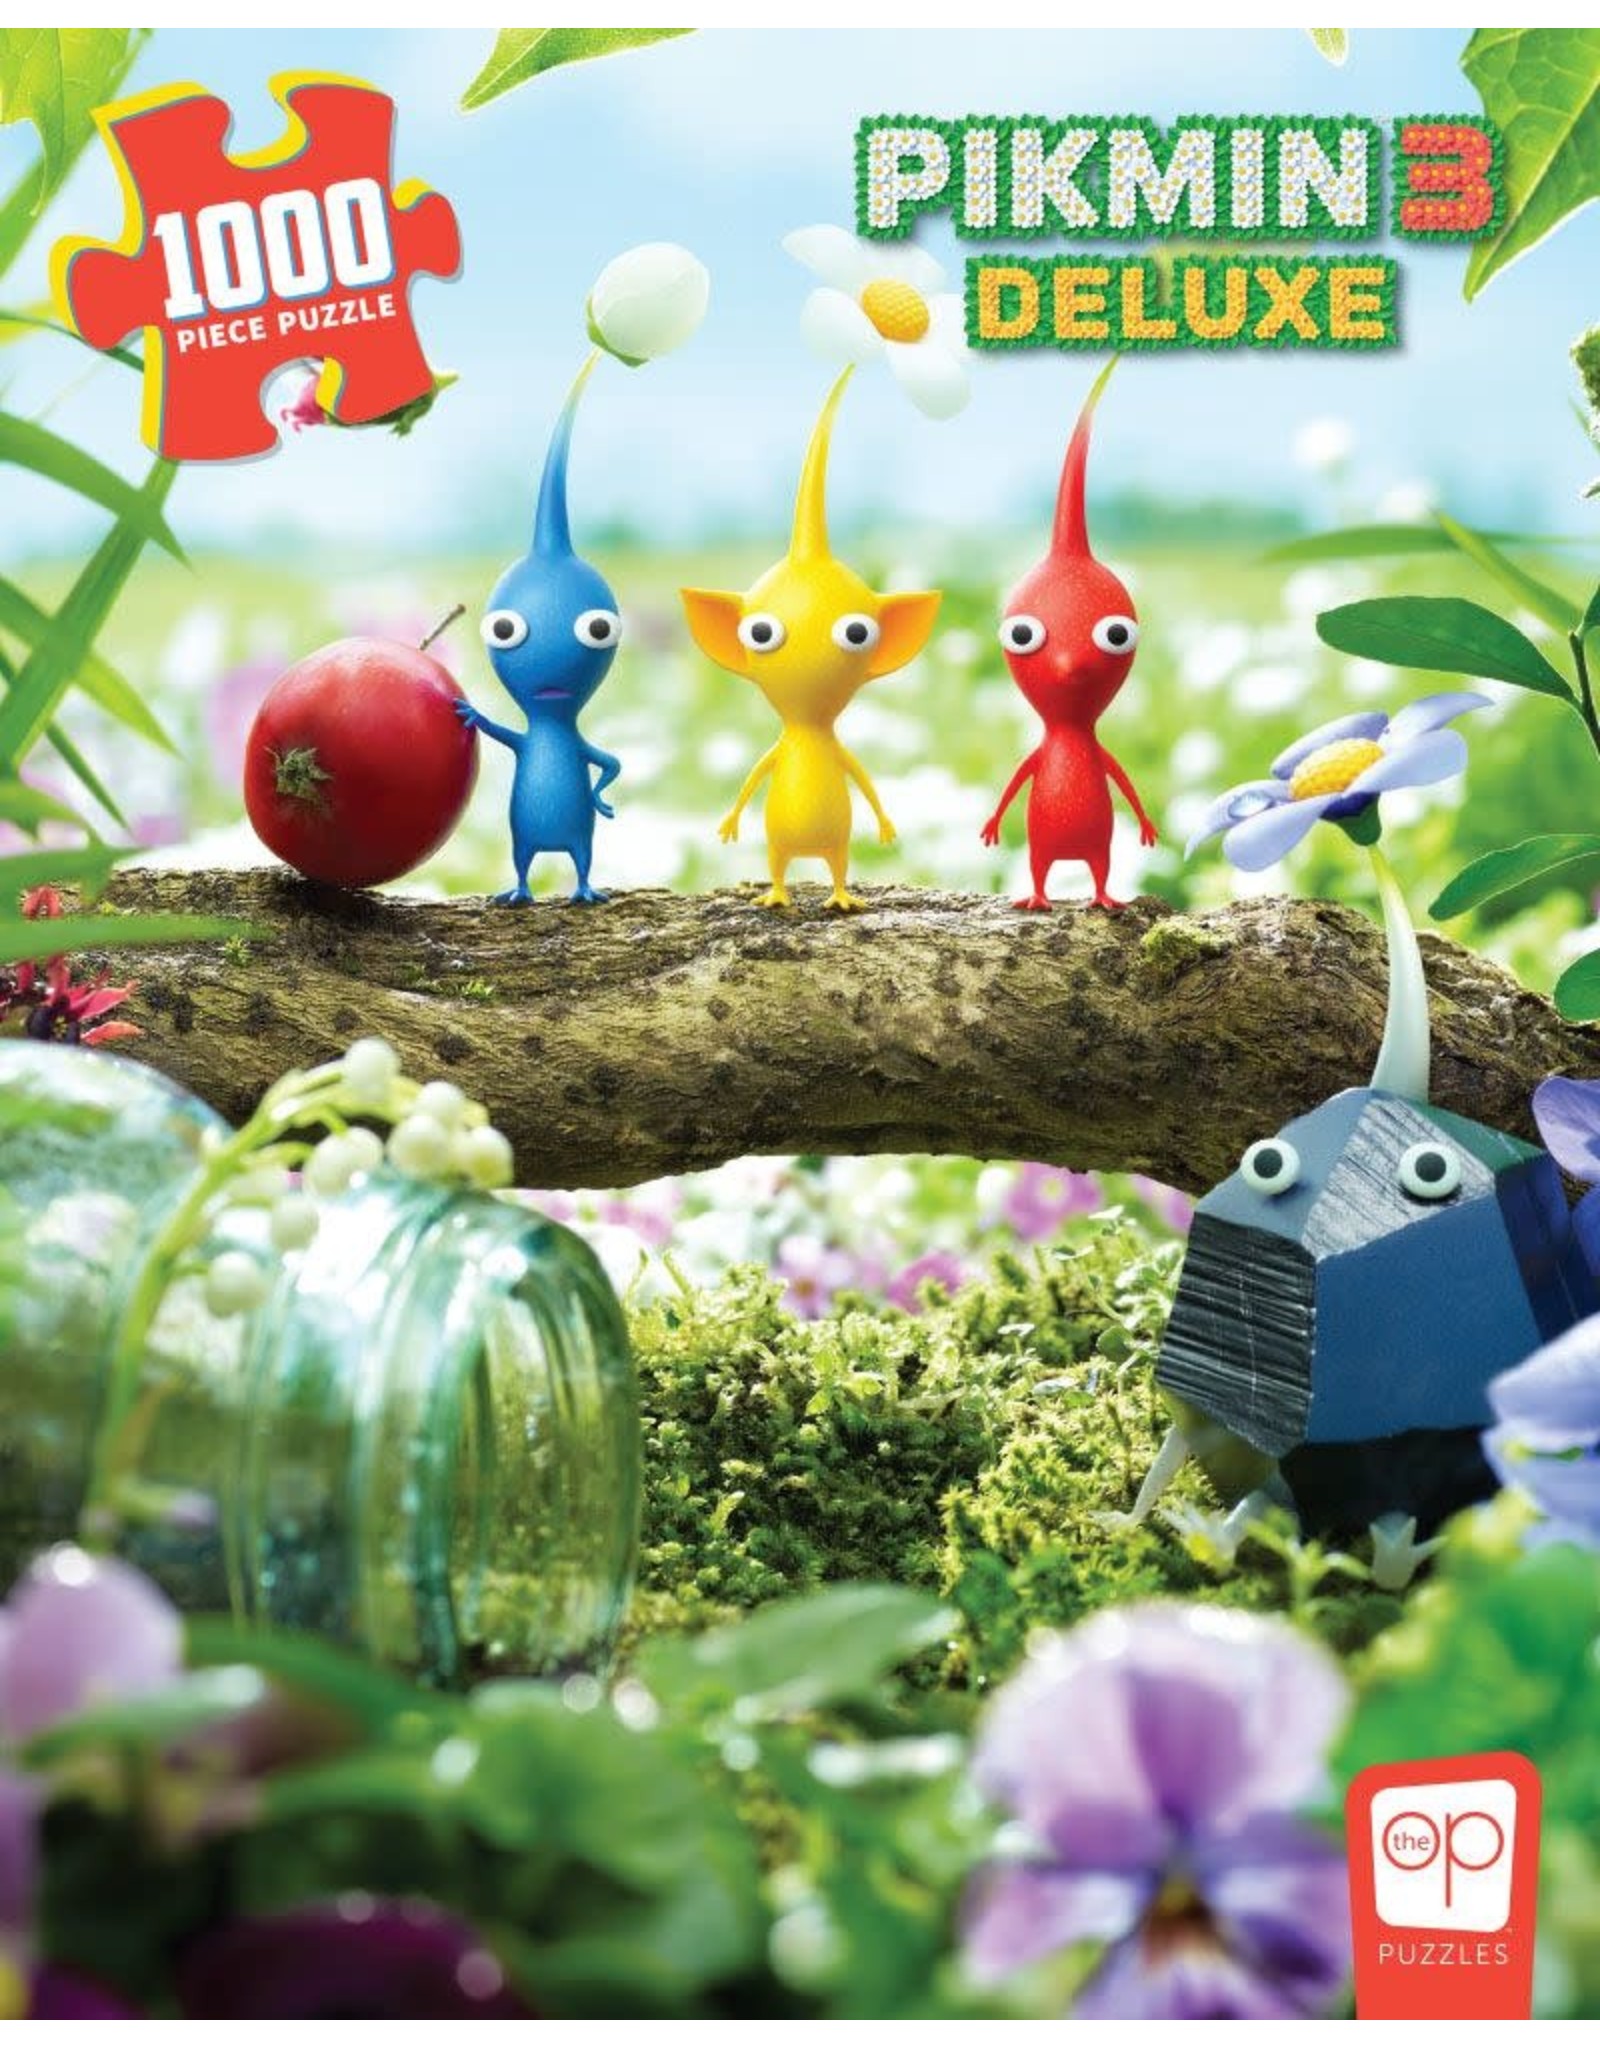 USAopoly USAopoly Puzzle - Pikmin 3 Deluxe 1000 Pieces